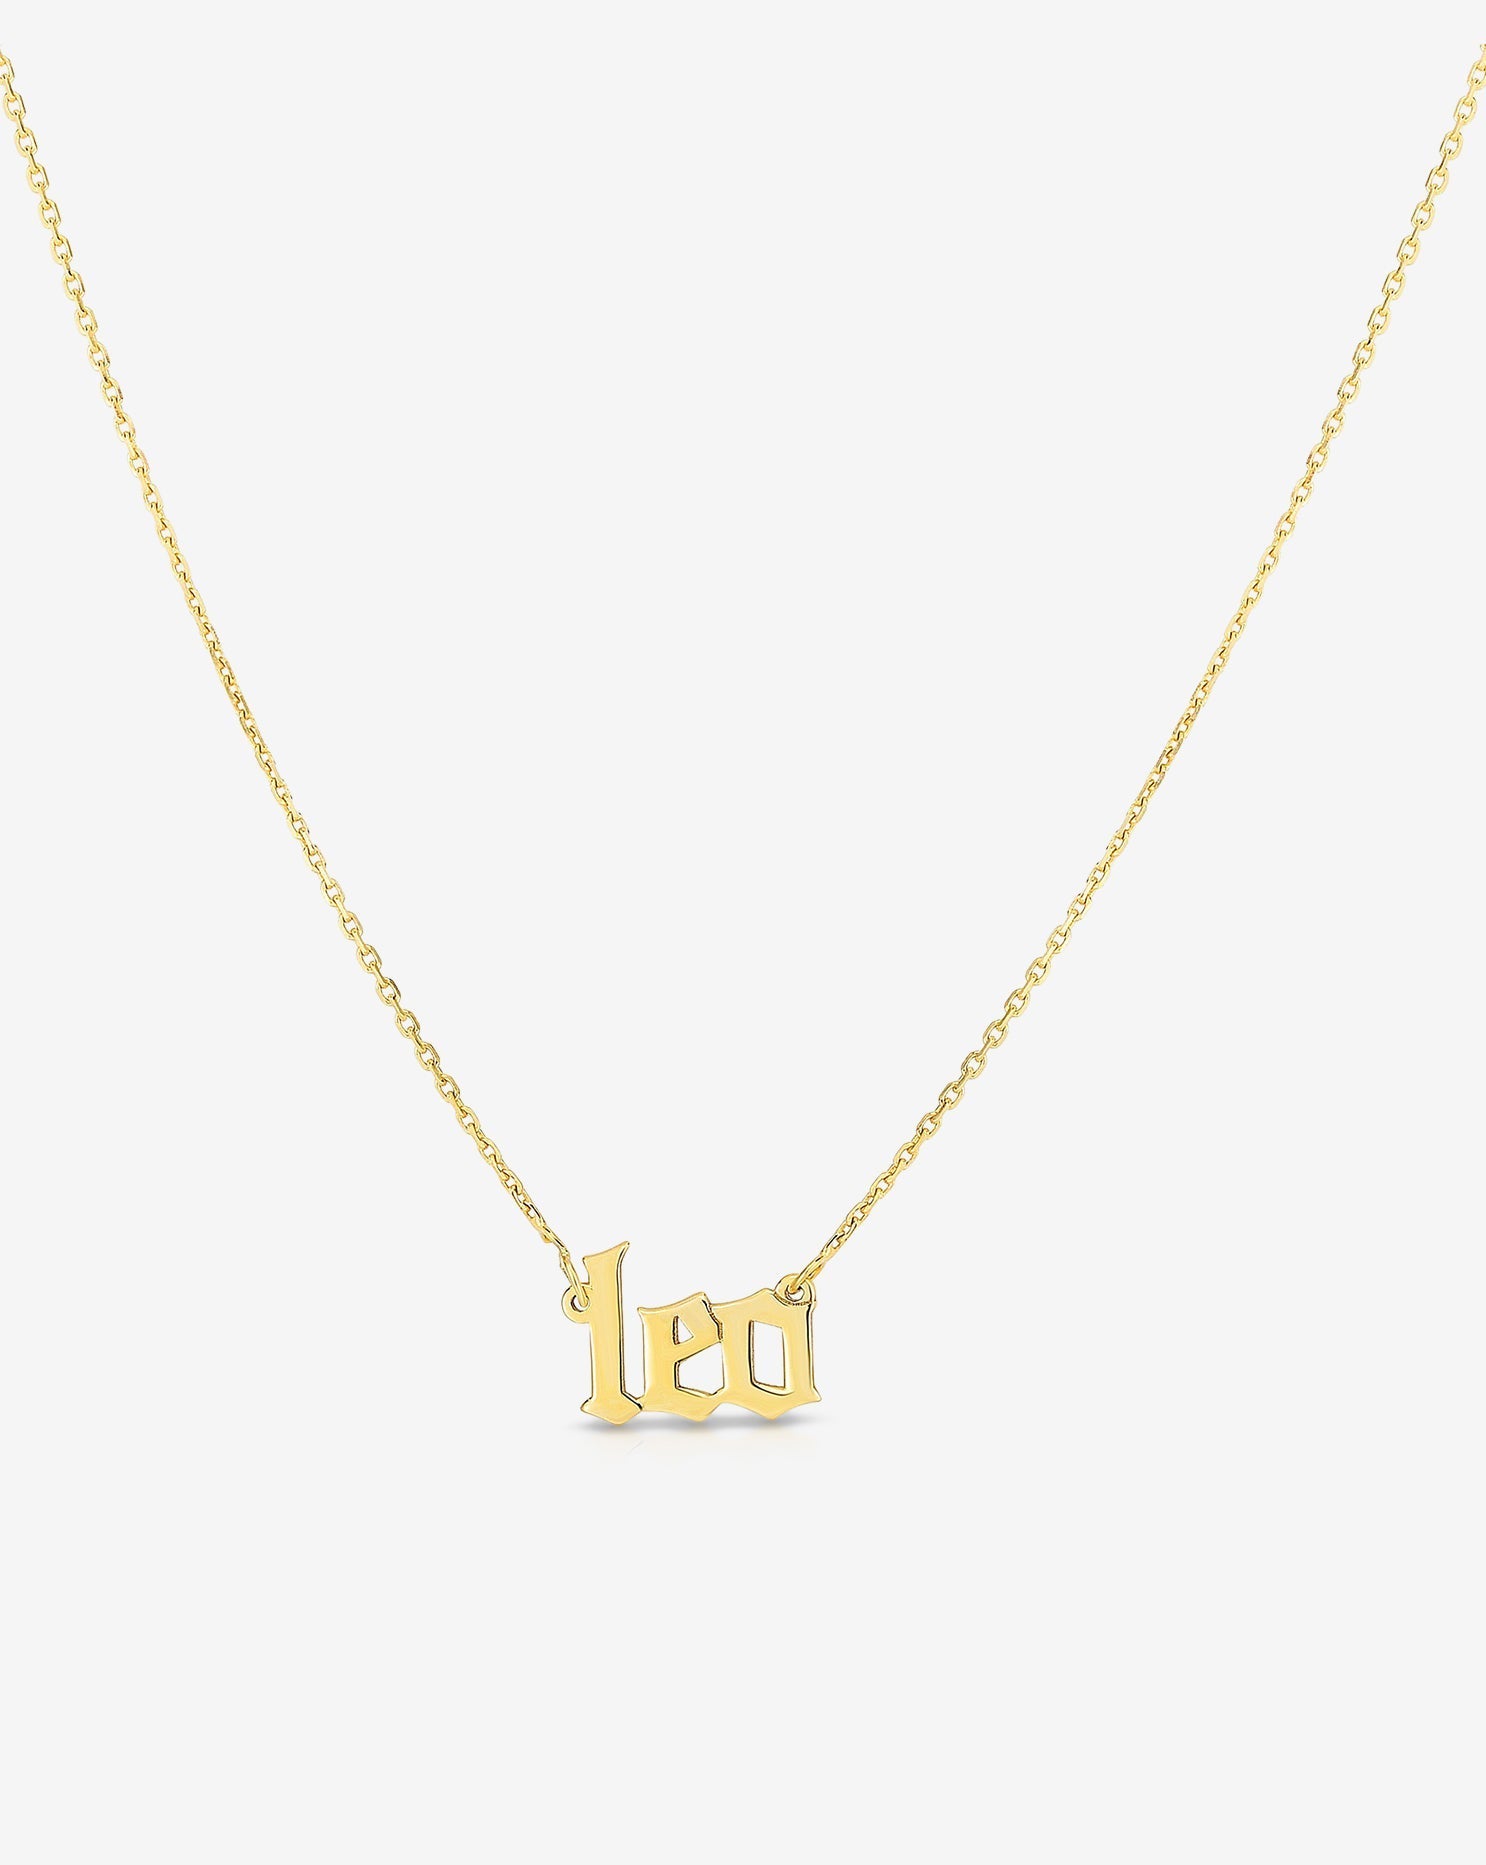 Ring Concierge Necklaces 14k Yellow Gold / 5 mm / Horizontal Personalized Gothic Letter Necklace - leo example